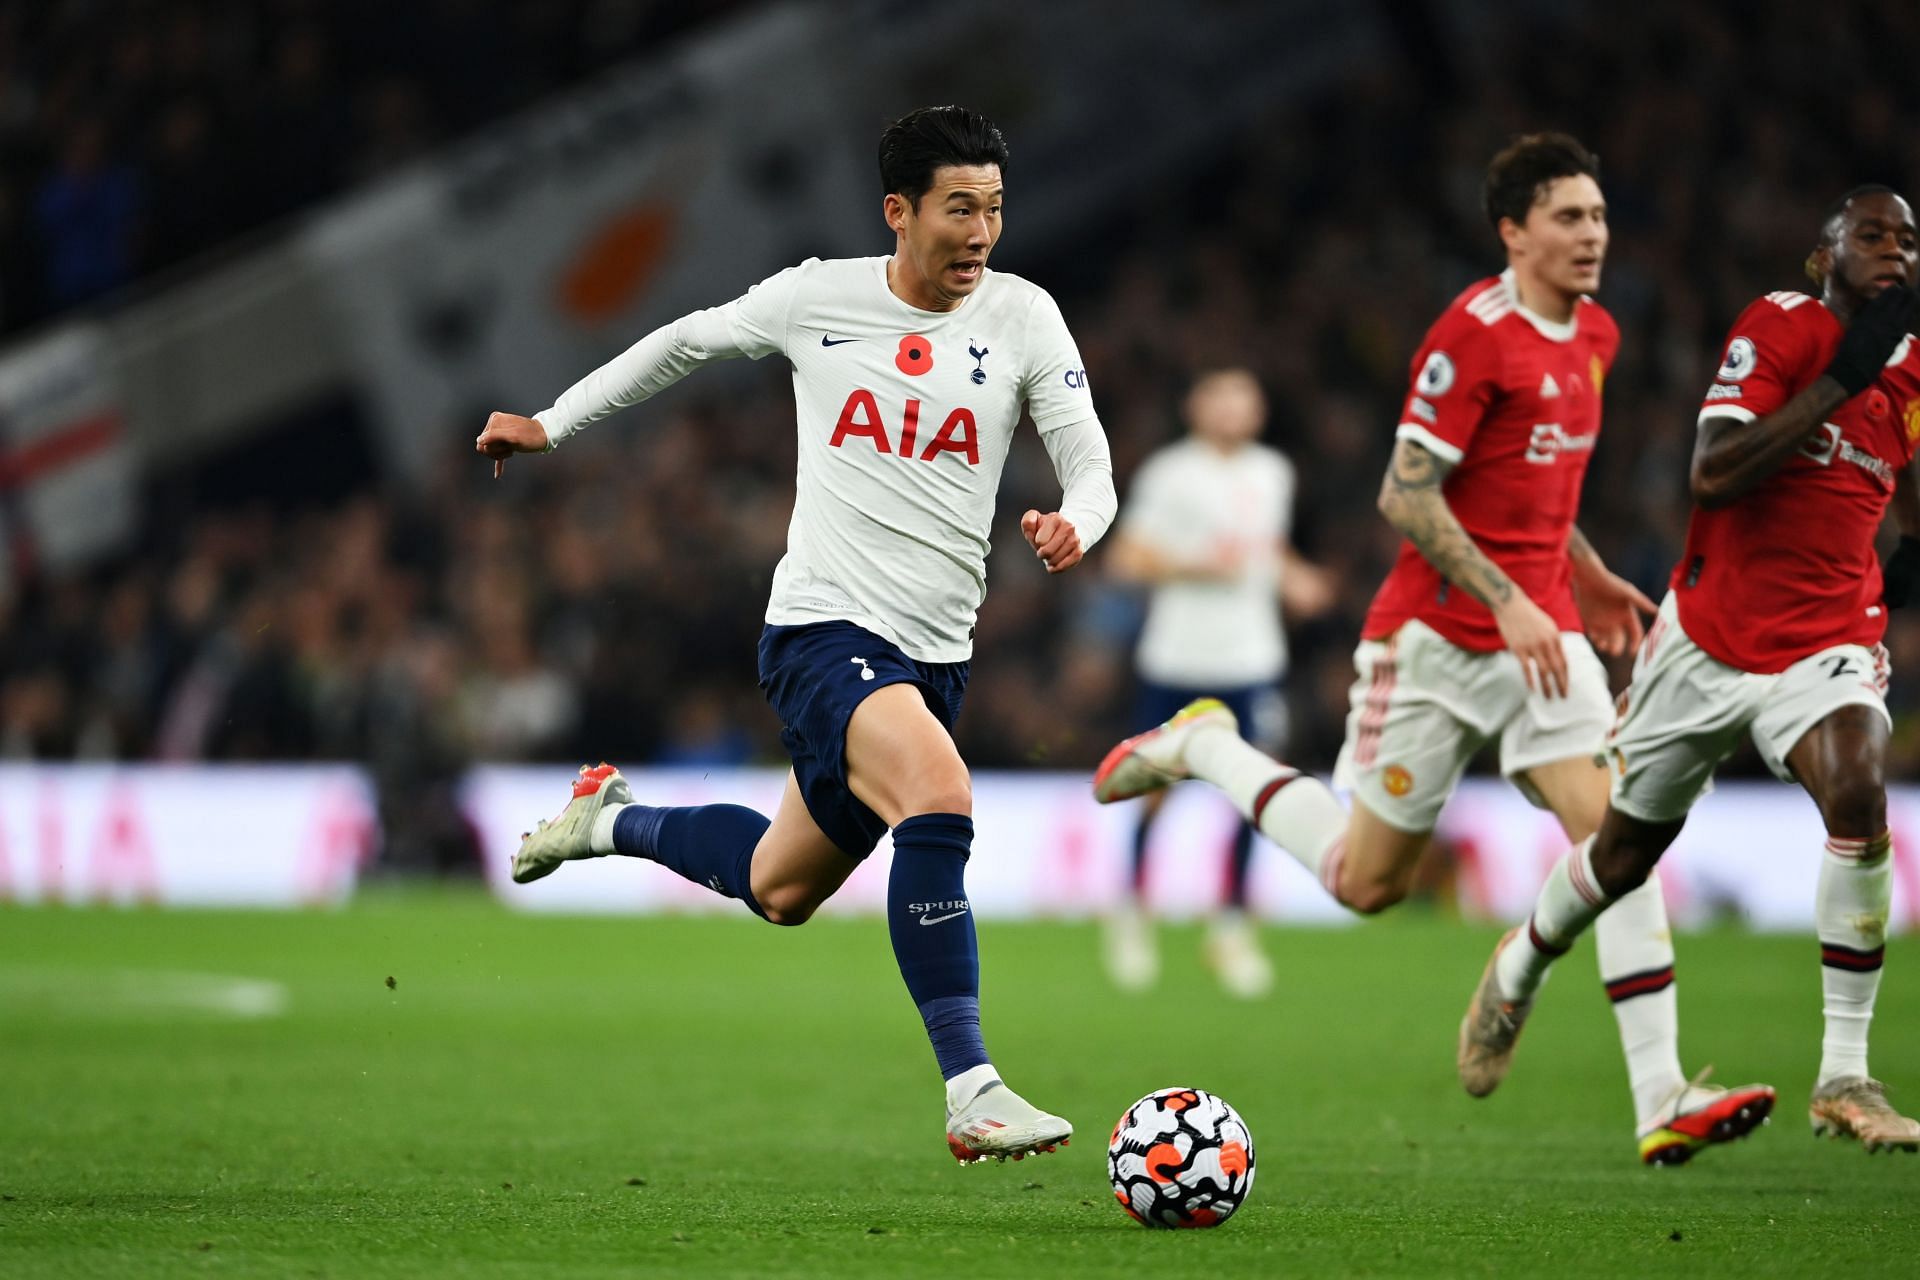 Son Heung-min in action for Tottenham Hotspur against Manchester United